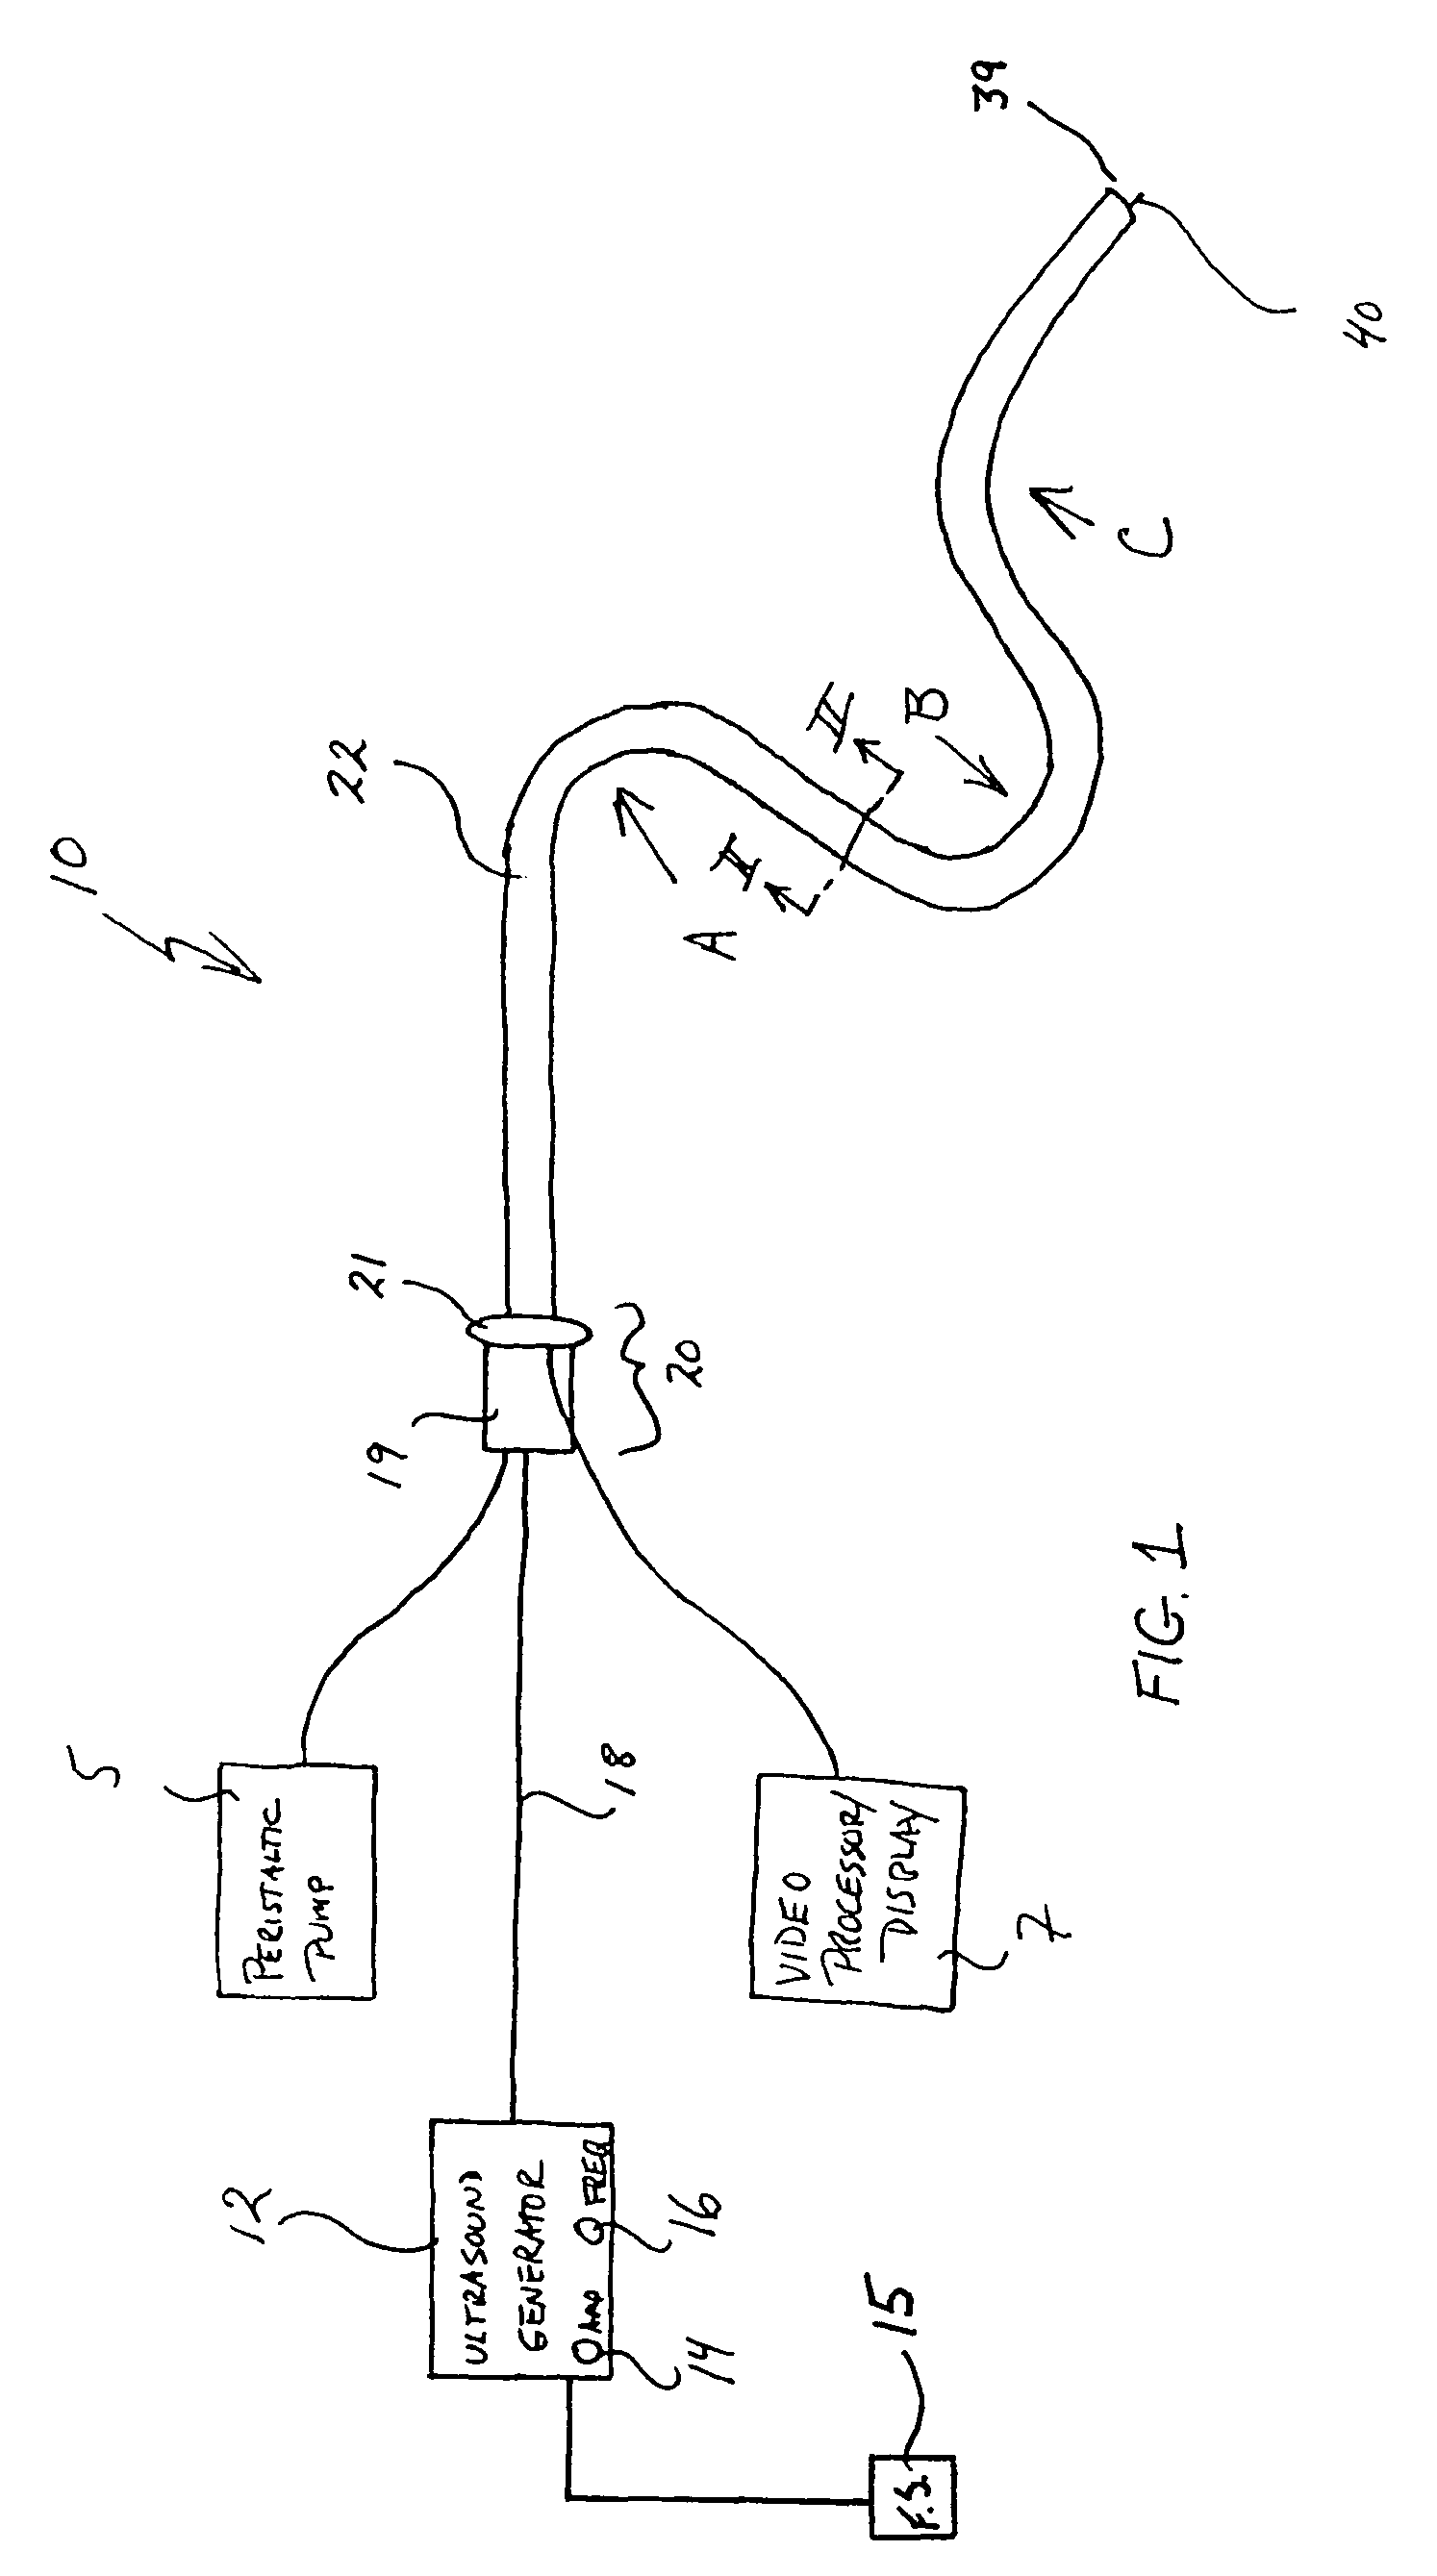 Flexible ultrasonic wire in an endoscope delivery system